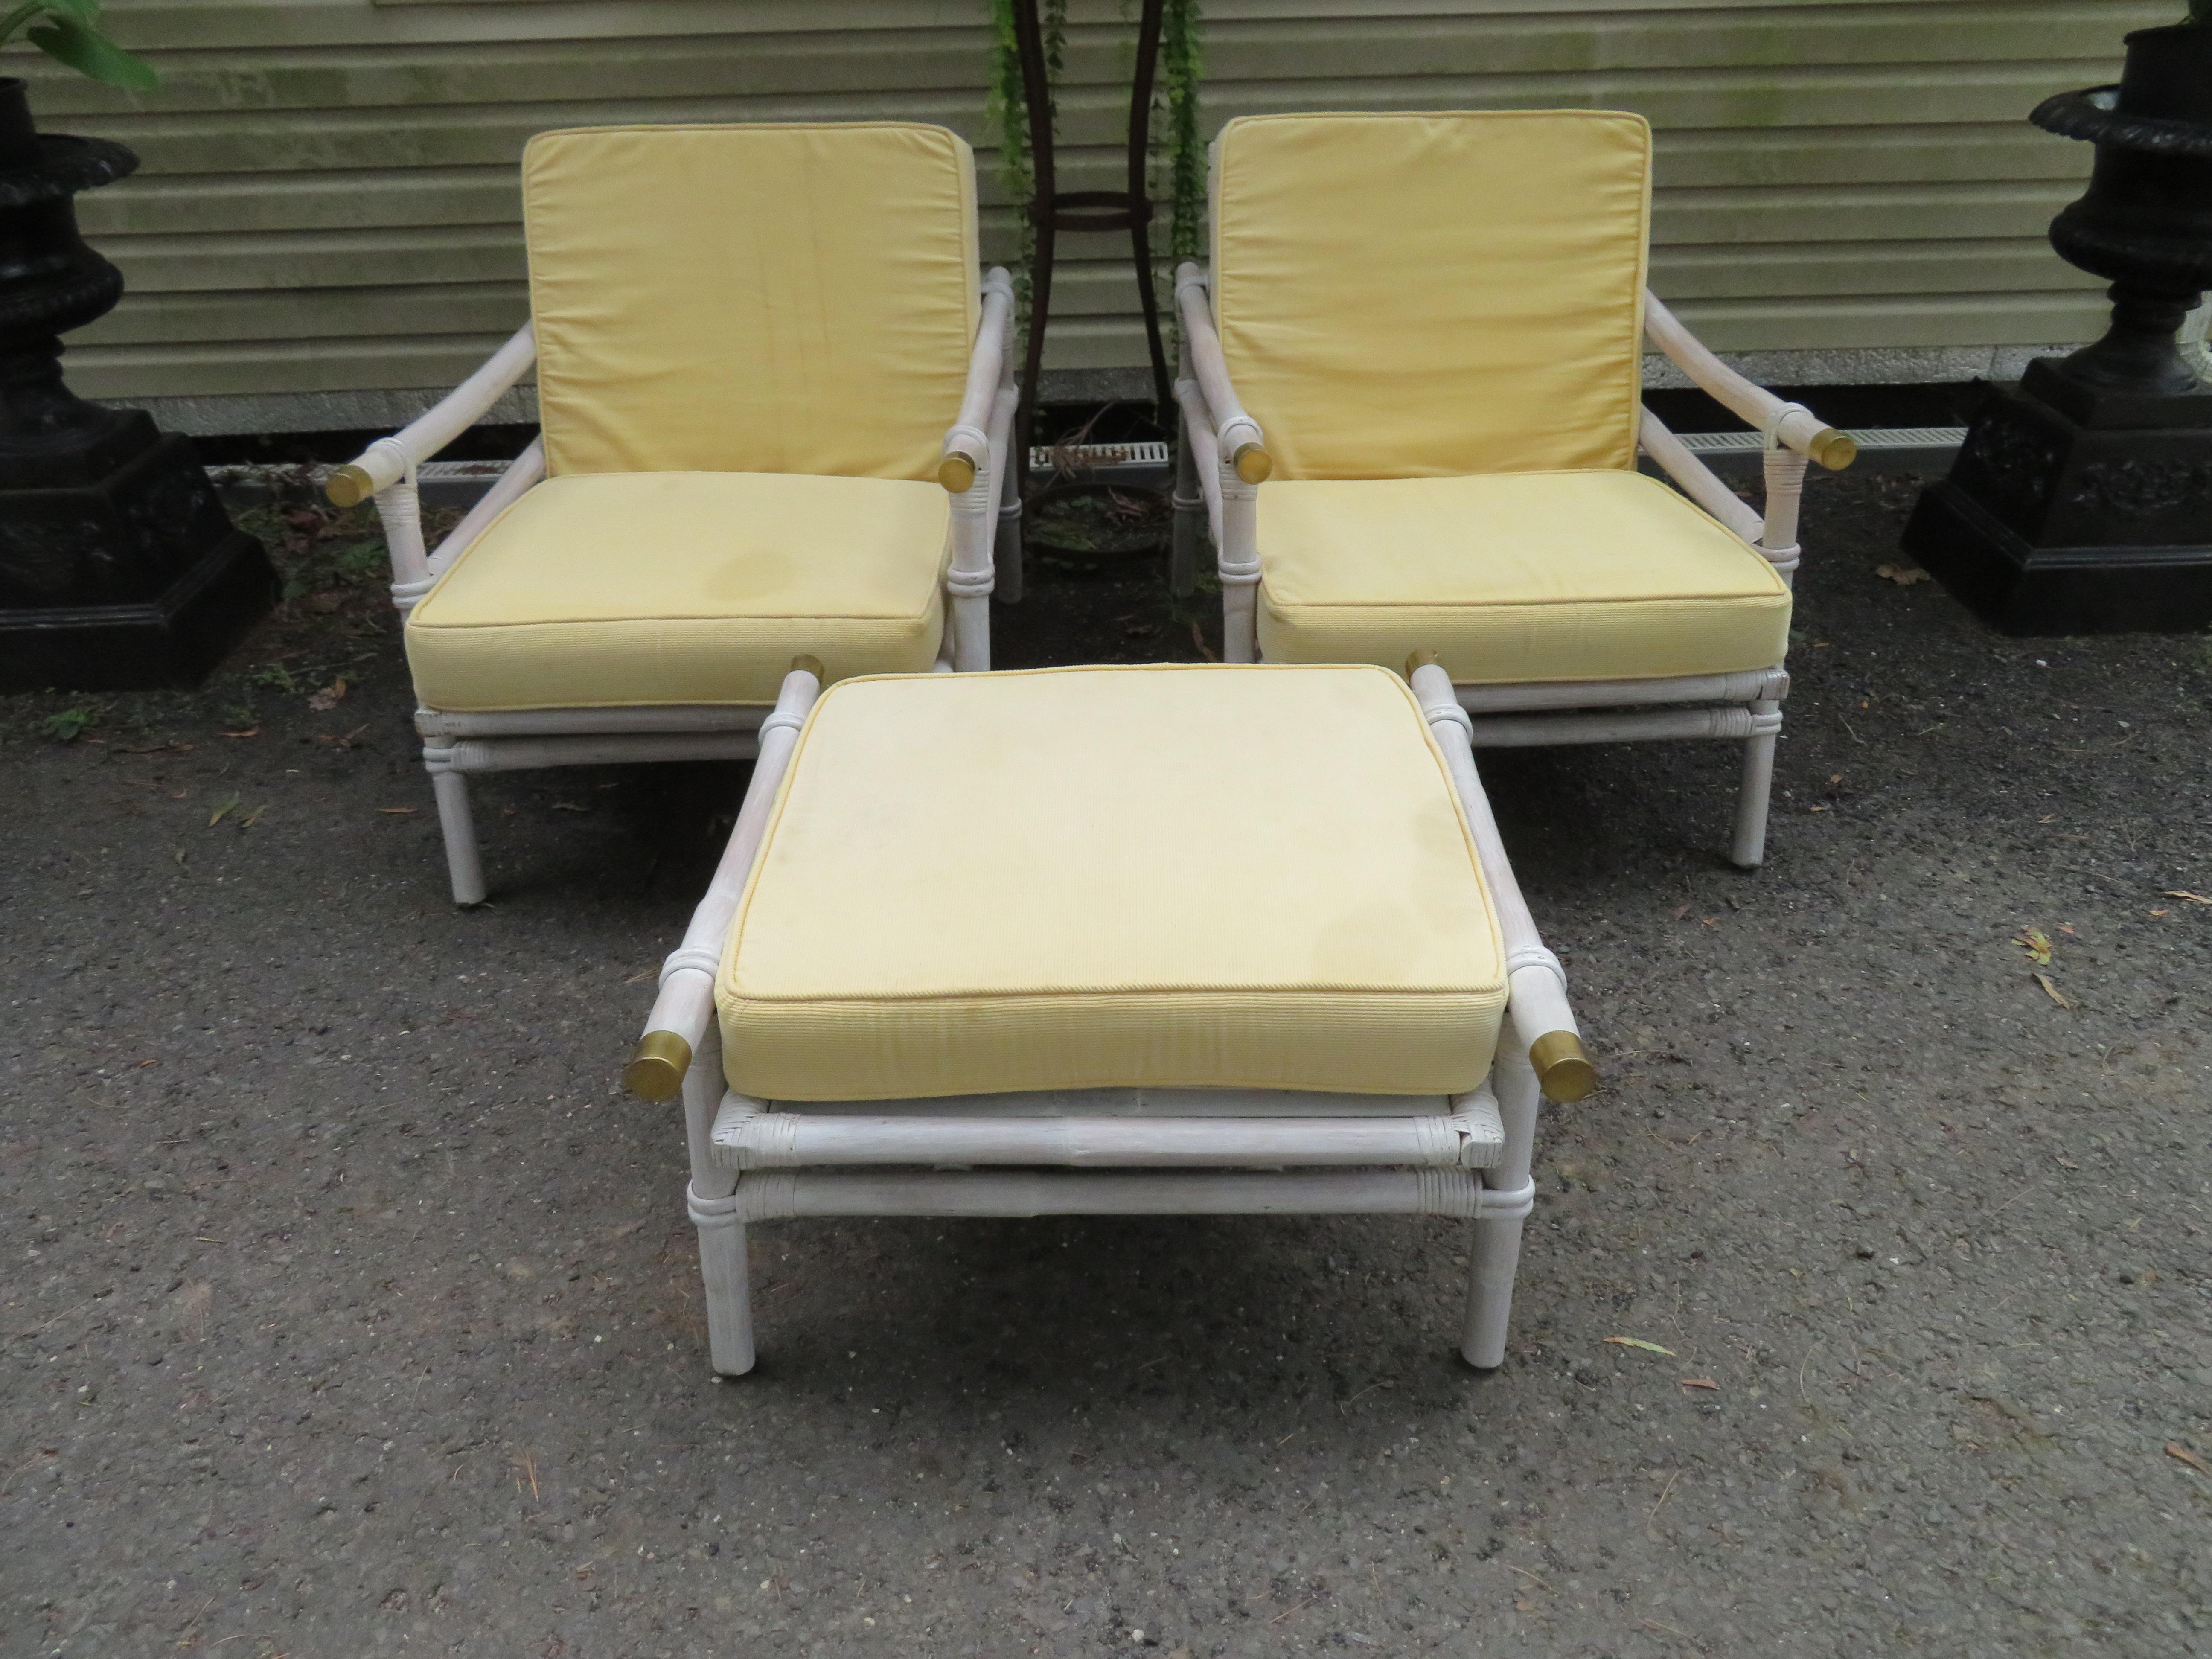 Lovely pair Ficks Reed rattan Campaign style lounge or club chairs plus one ottoman with interesting brass cap accents by John Wisner for the Far Horizons collection, 1954. This pair retains their original very rare white washed finish in nice